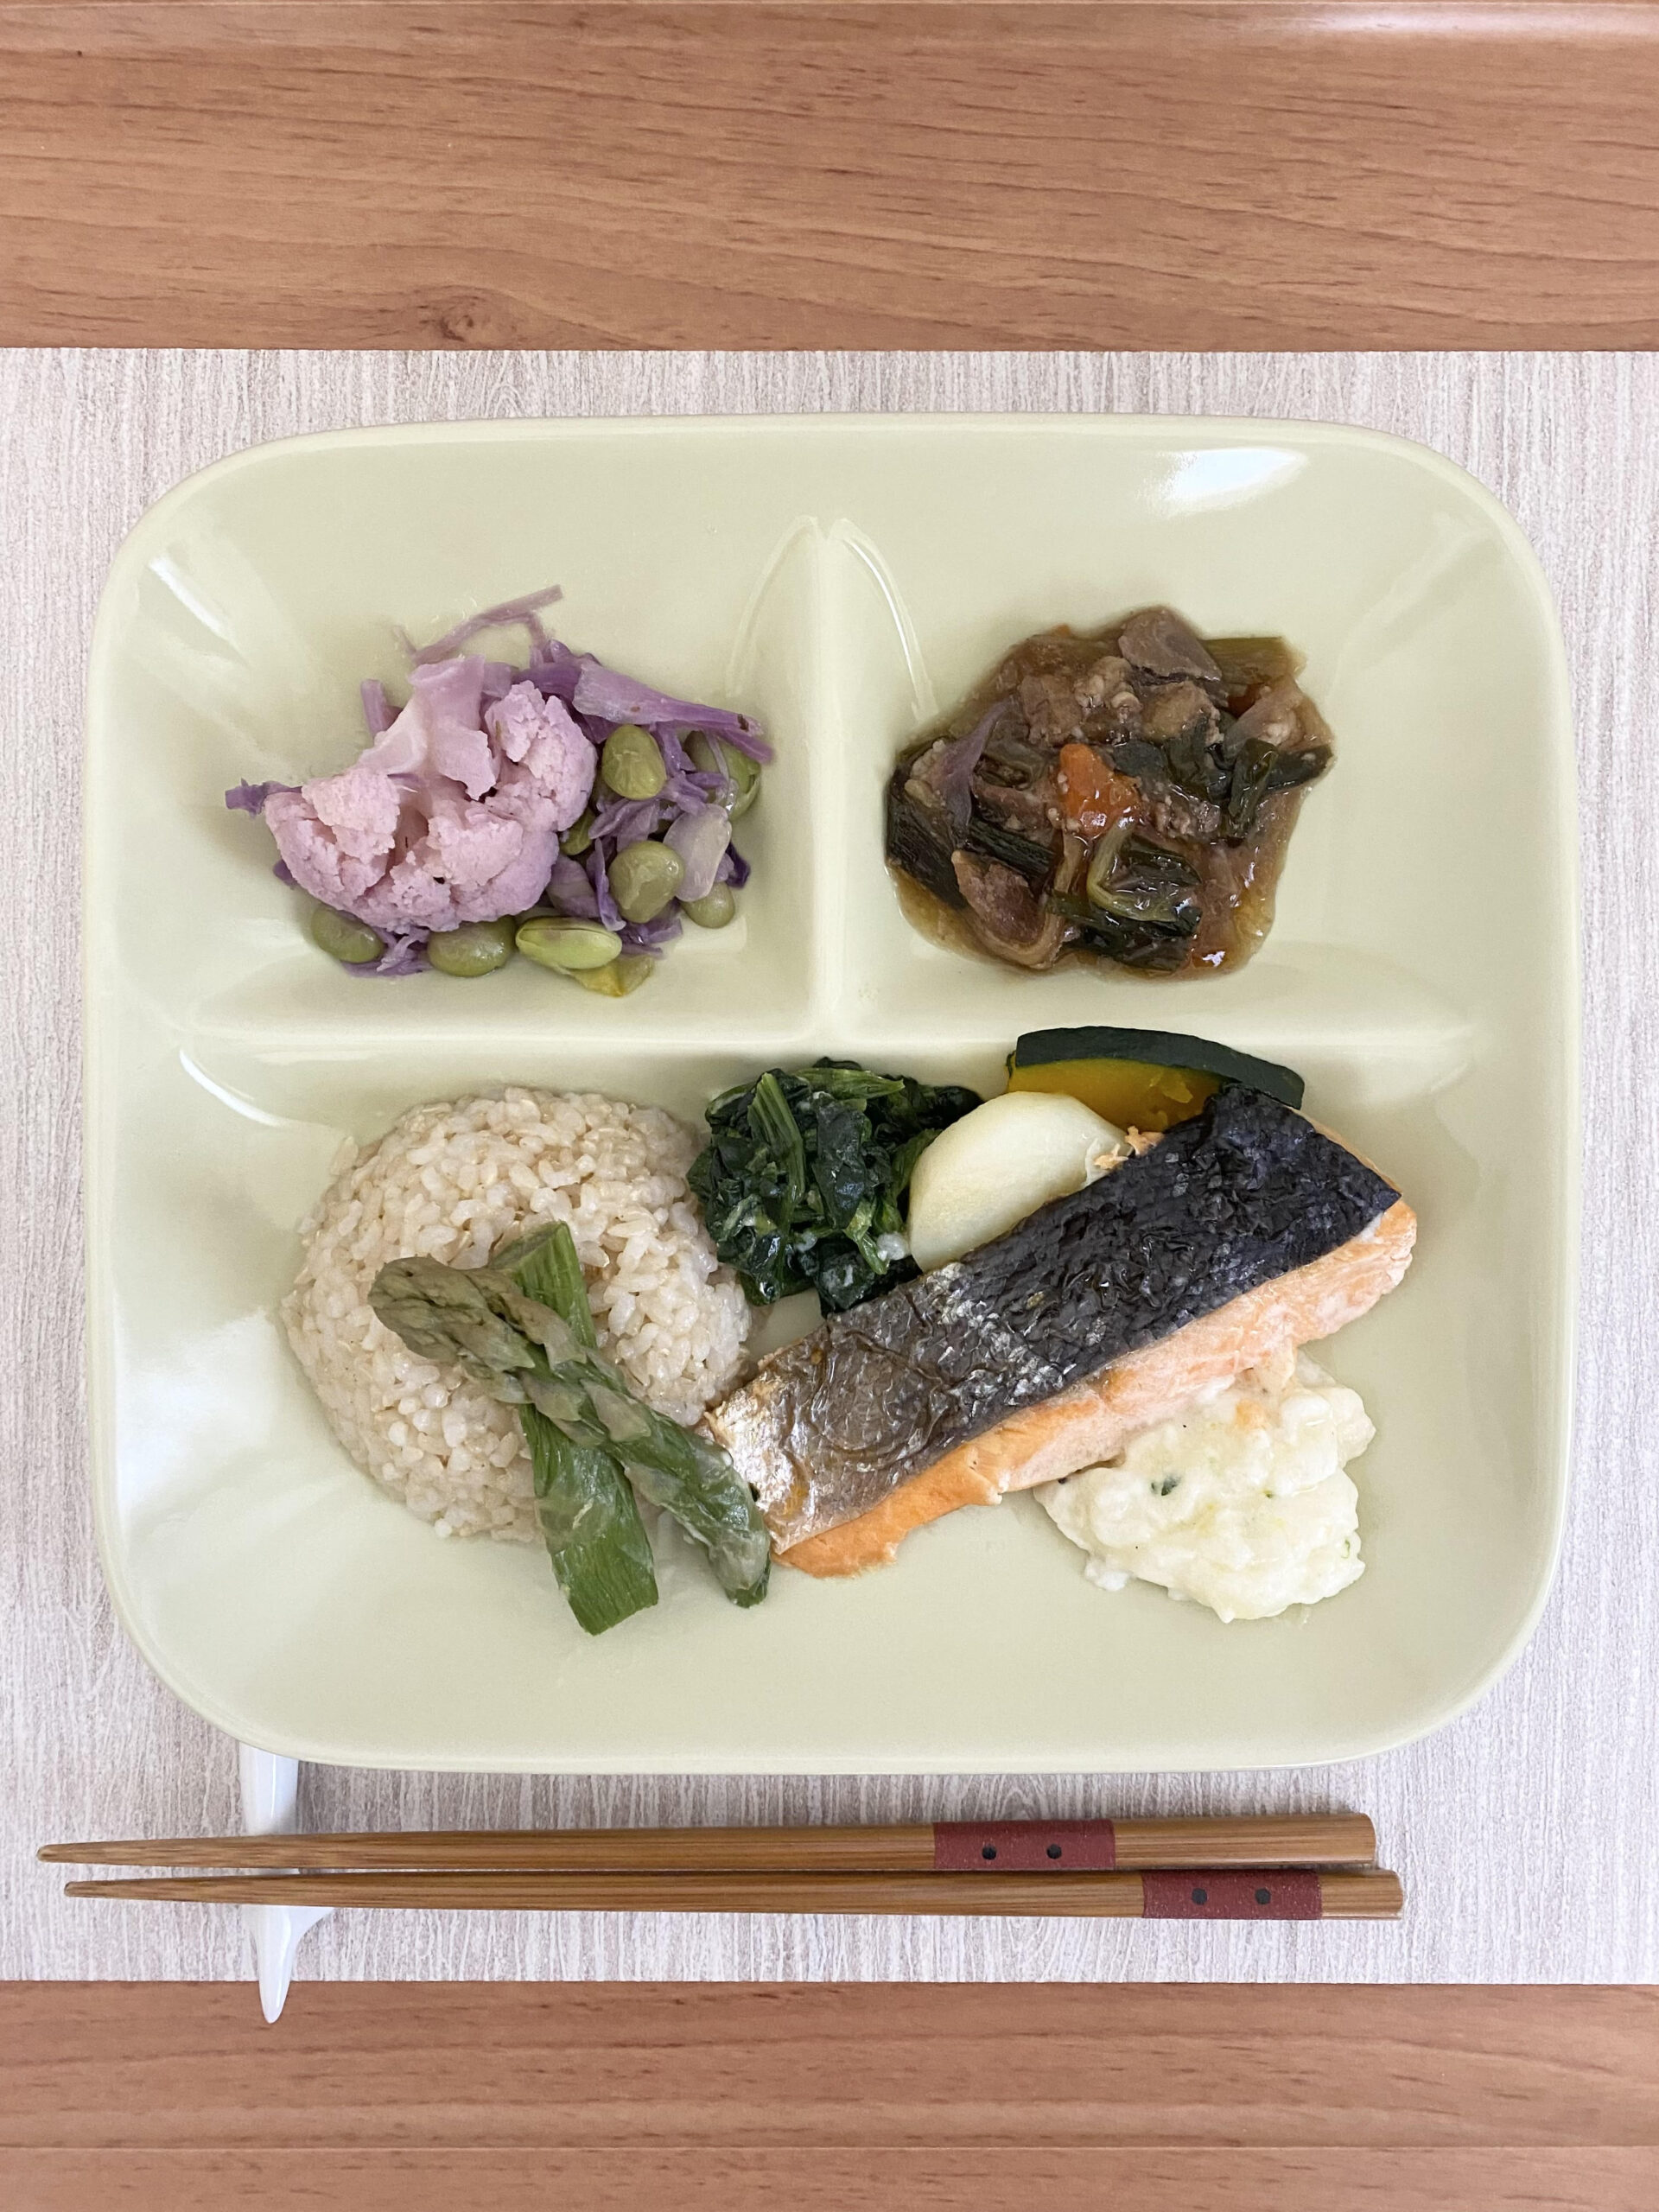 FIT FOOD HOME_サーモンのフローレンス風_盛り付け後